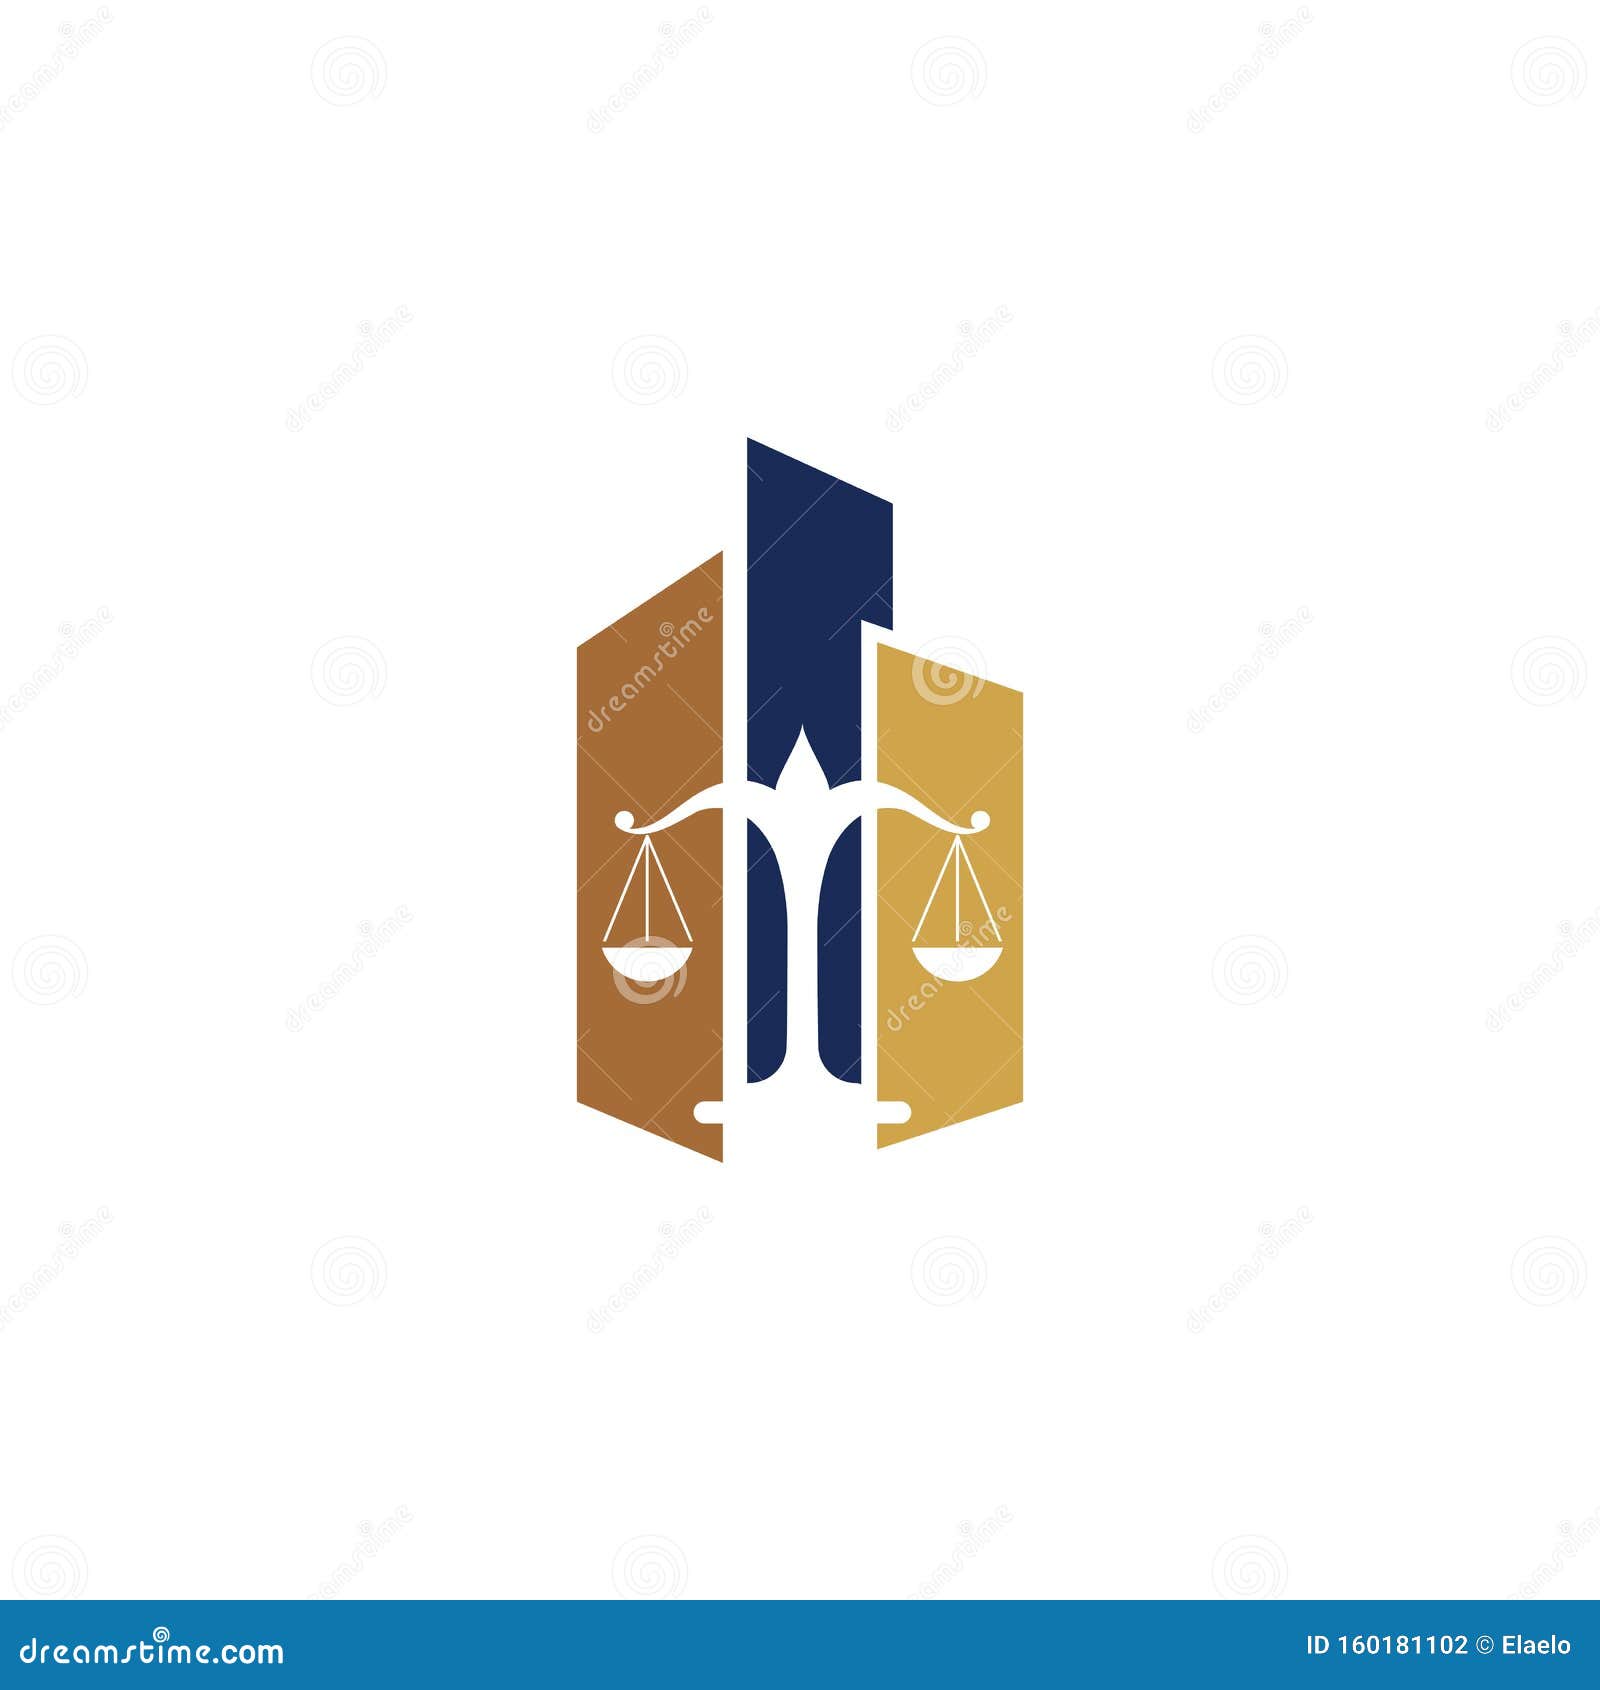 justice law logo template